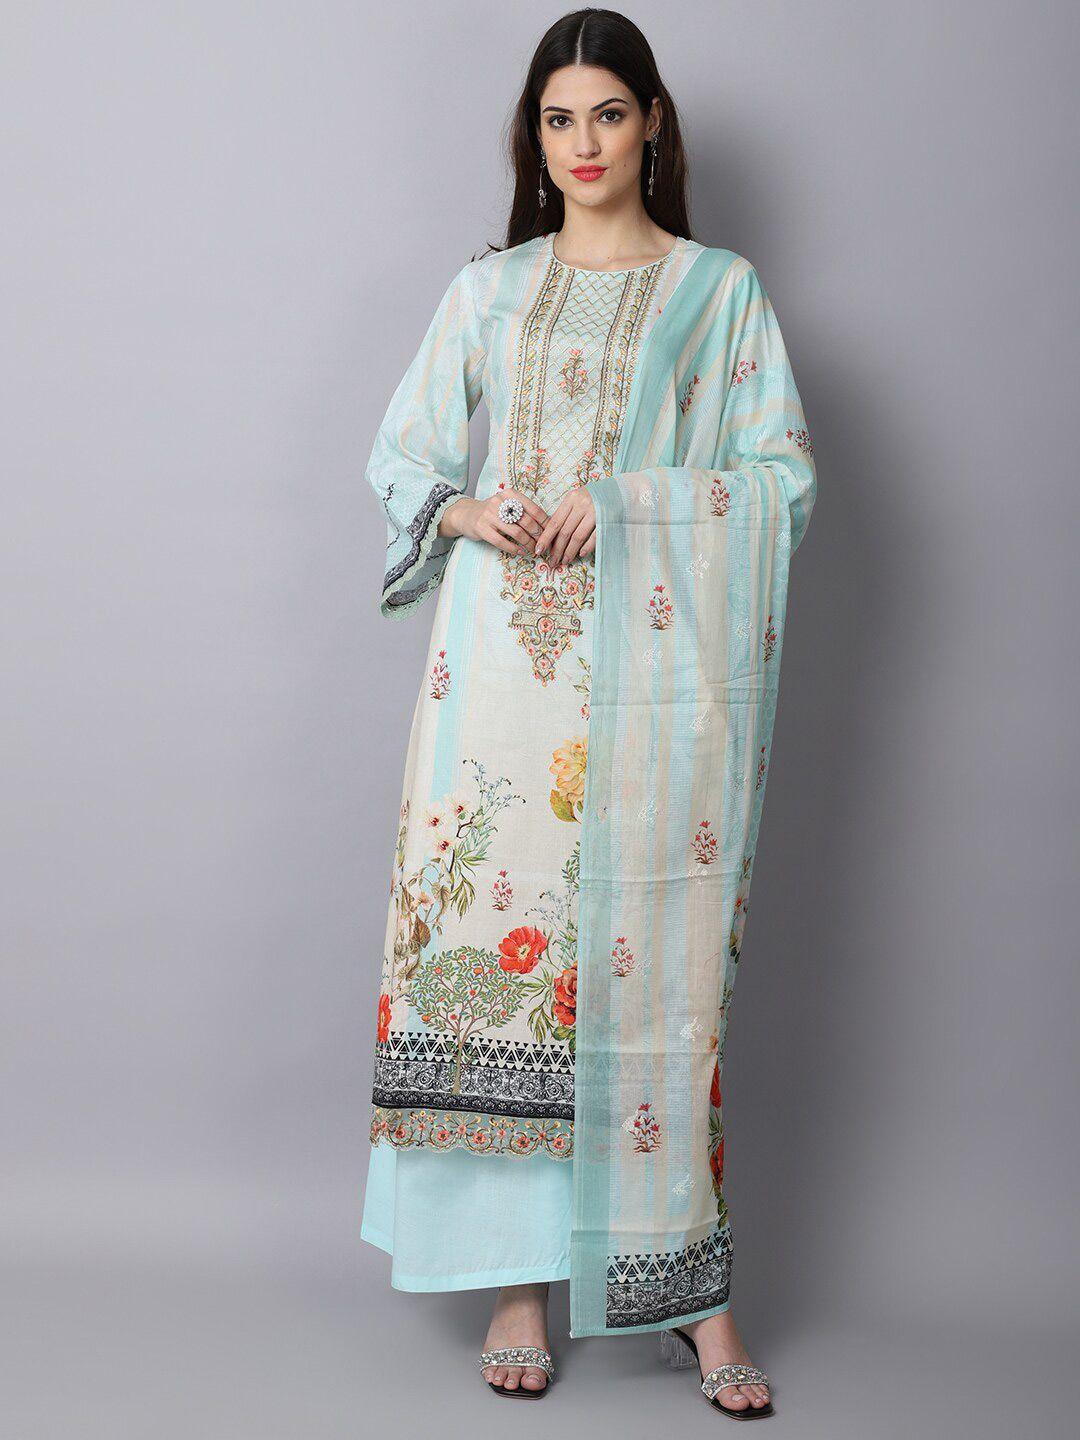 stylee lifestyle cream-coloured & blue printed unstitched dress material